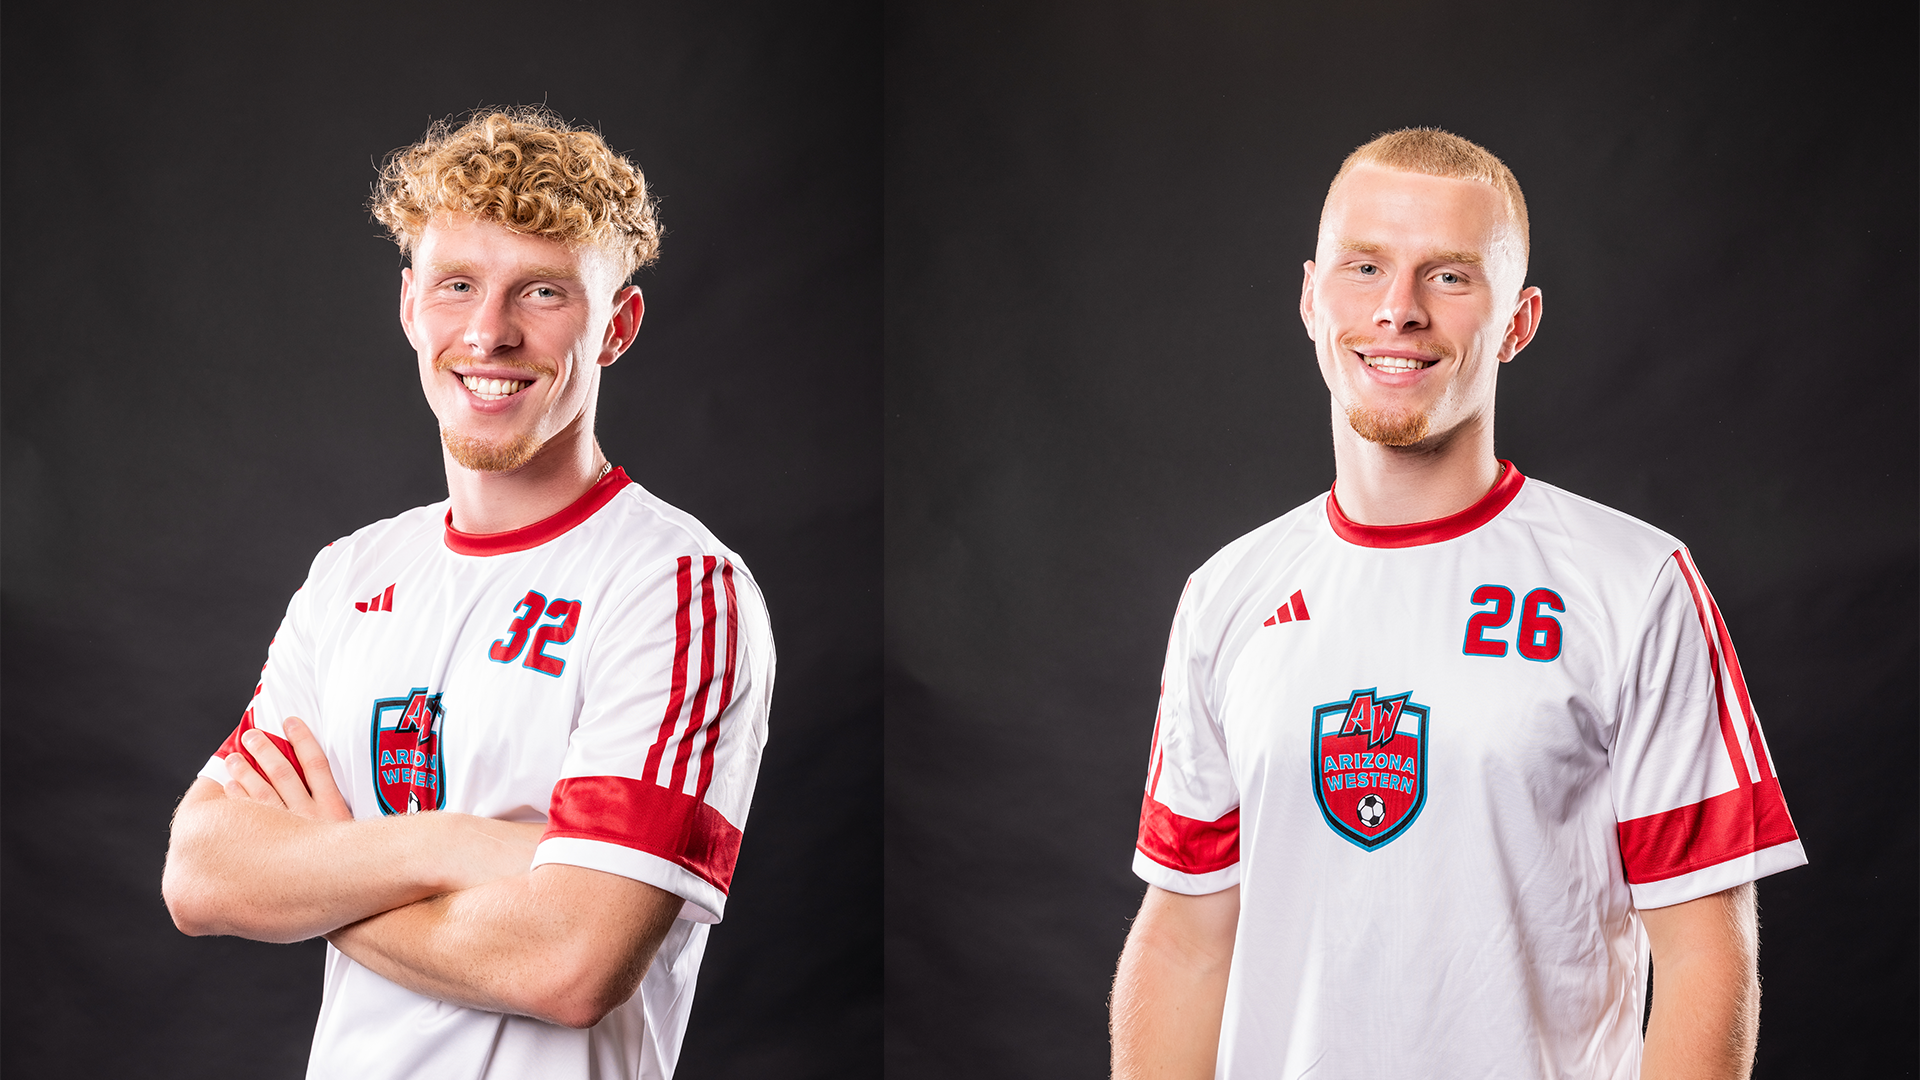 Jeremi and Wiktor Kwiatkowski sign to play at four-year institutions